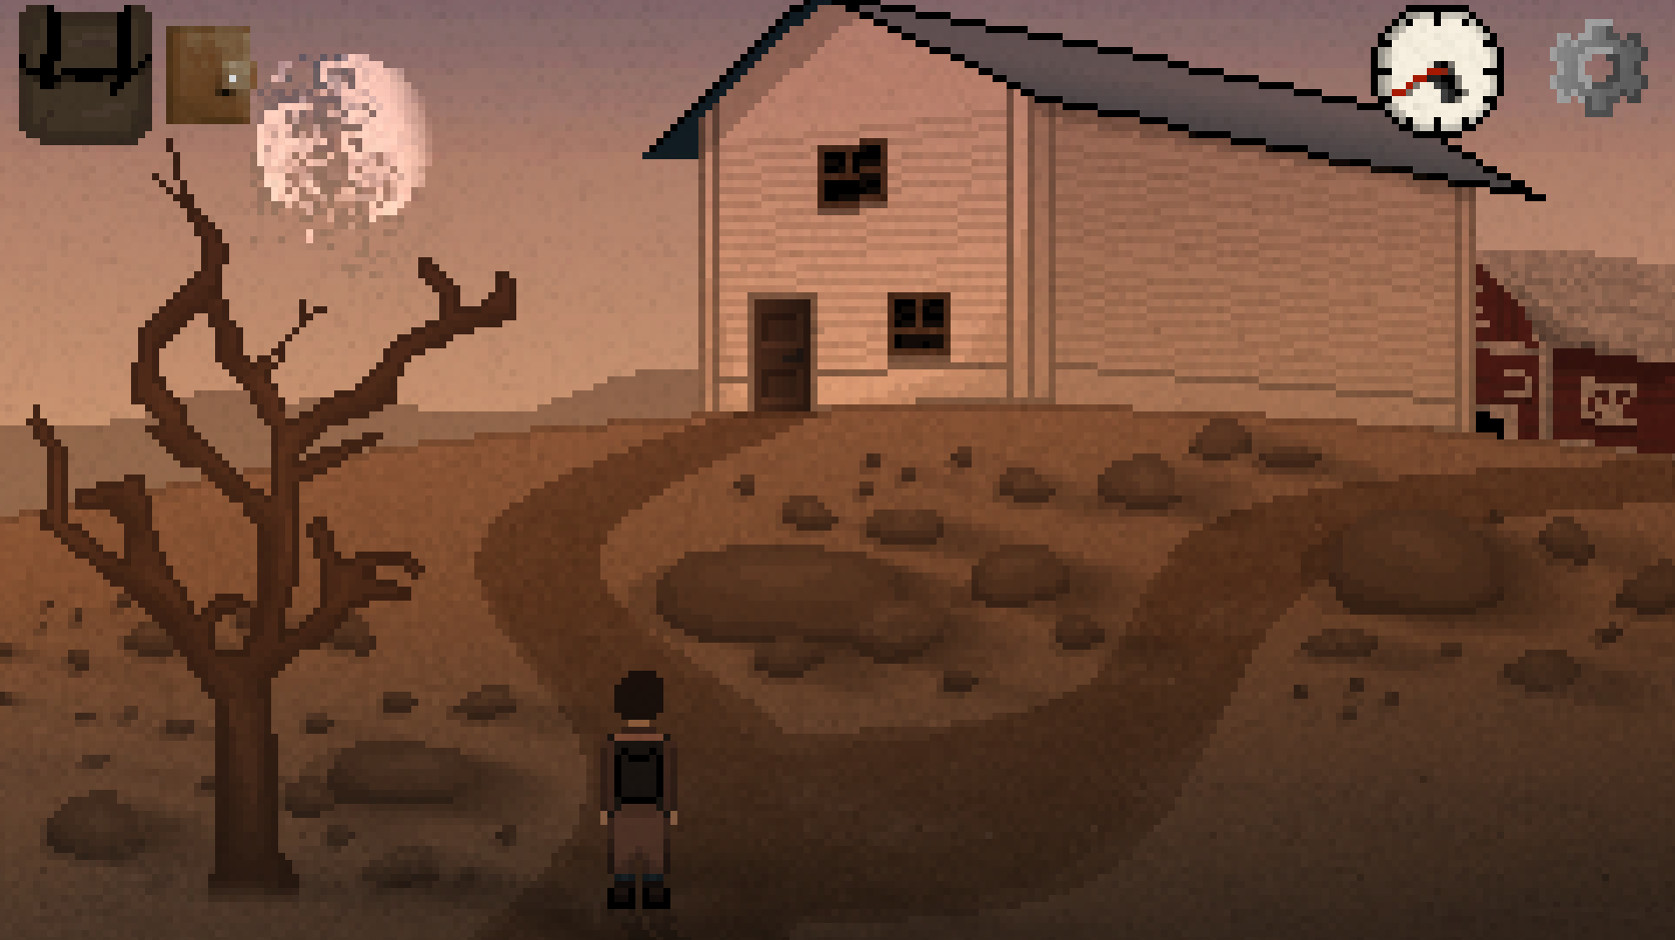 Don't Escape: 4 Days in a Wasteland Free Download